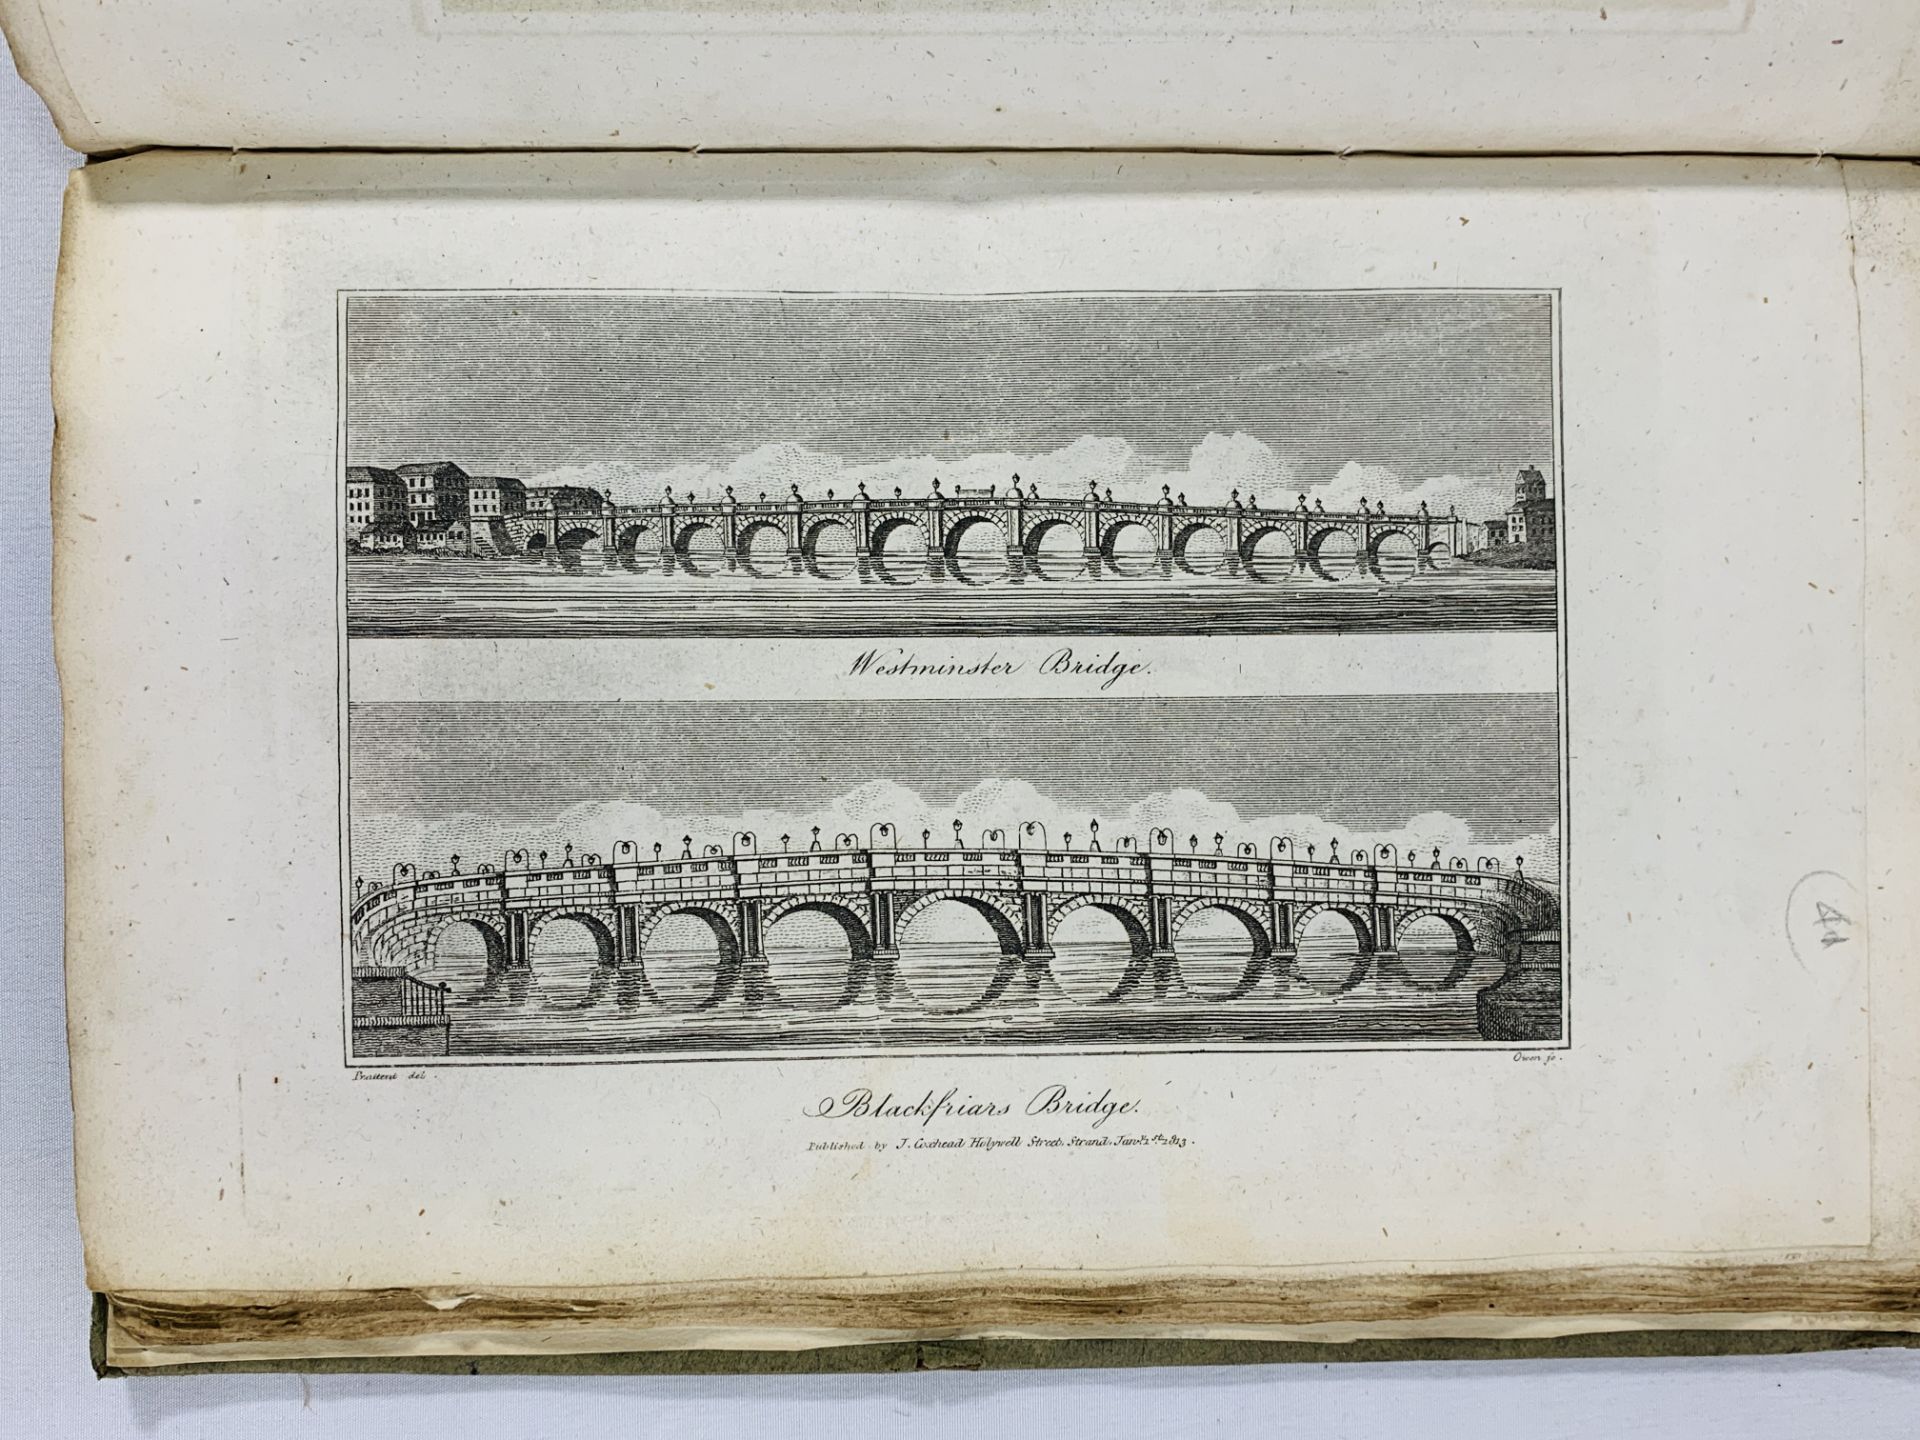 Two copies of The Antiquities of London from the works of Thomas Pennant - Image 4 of 6